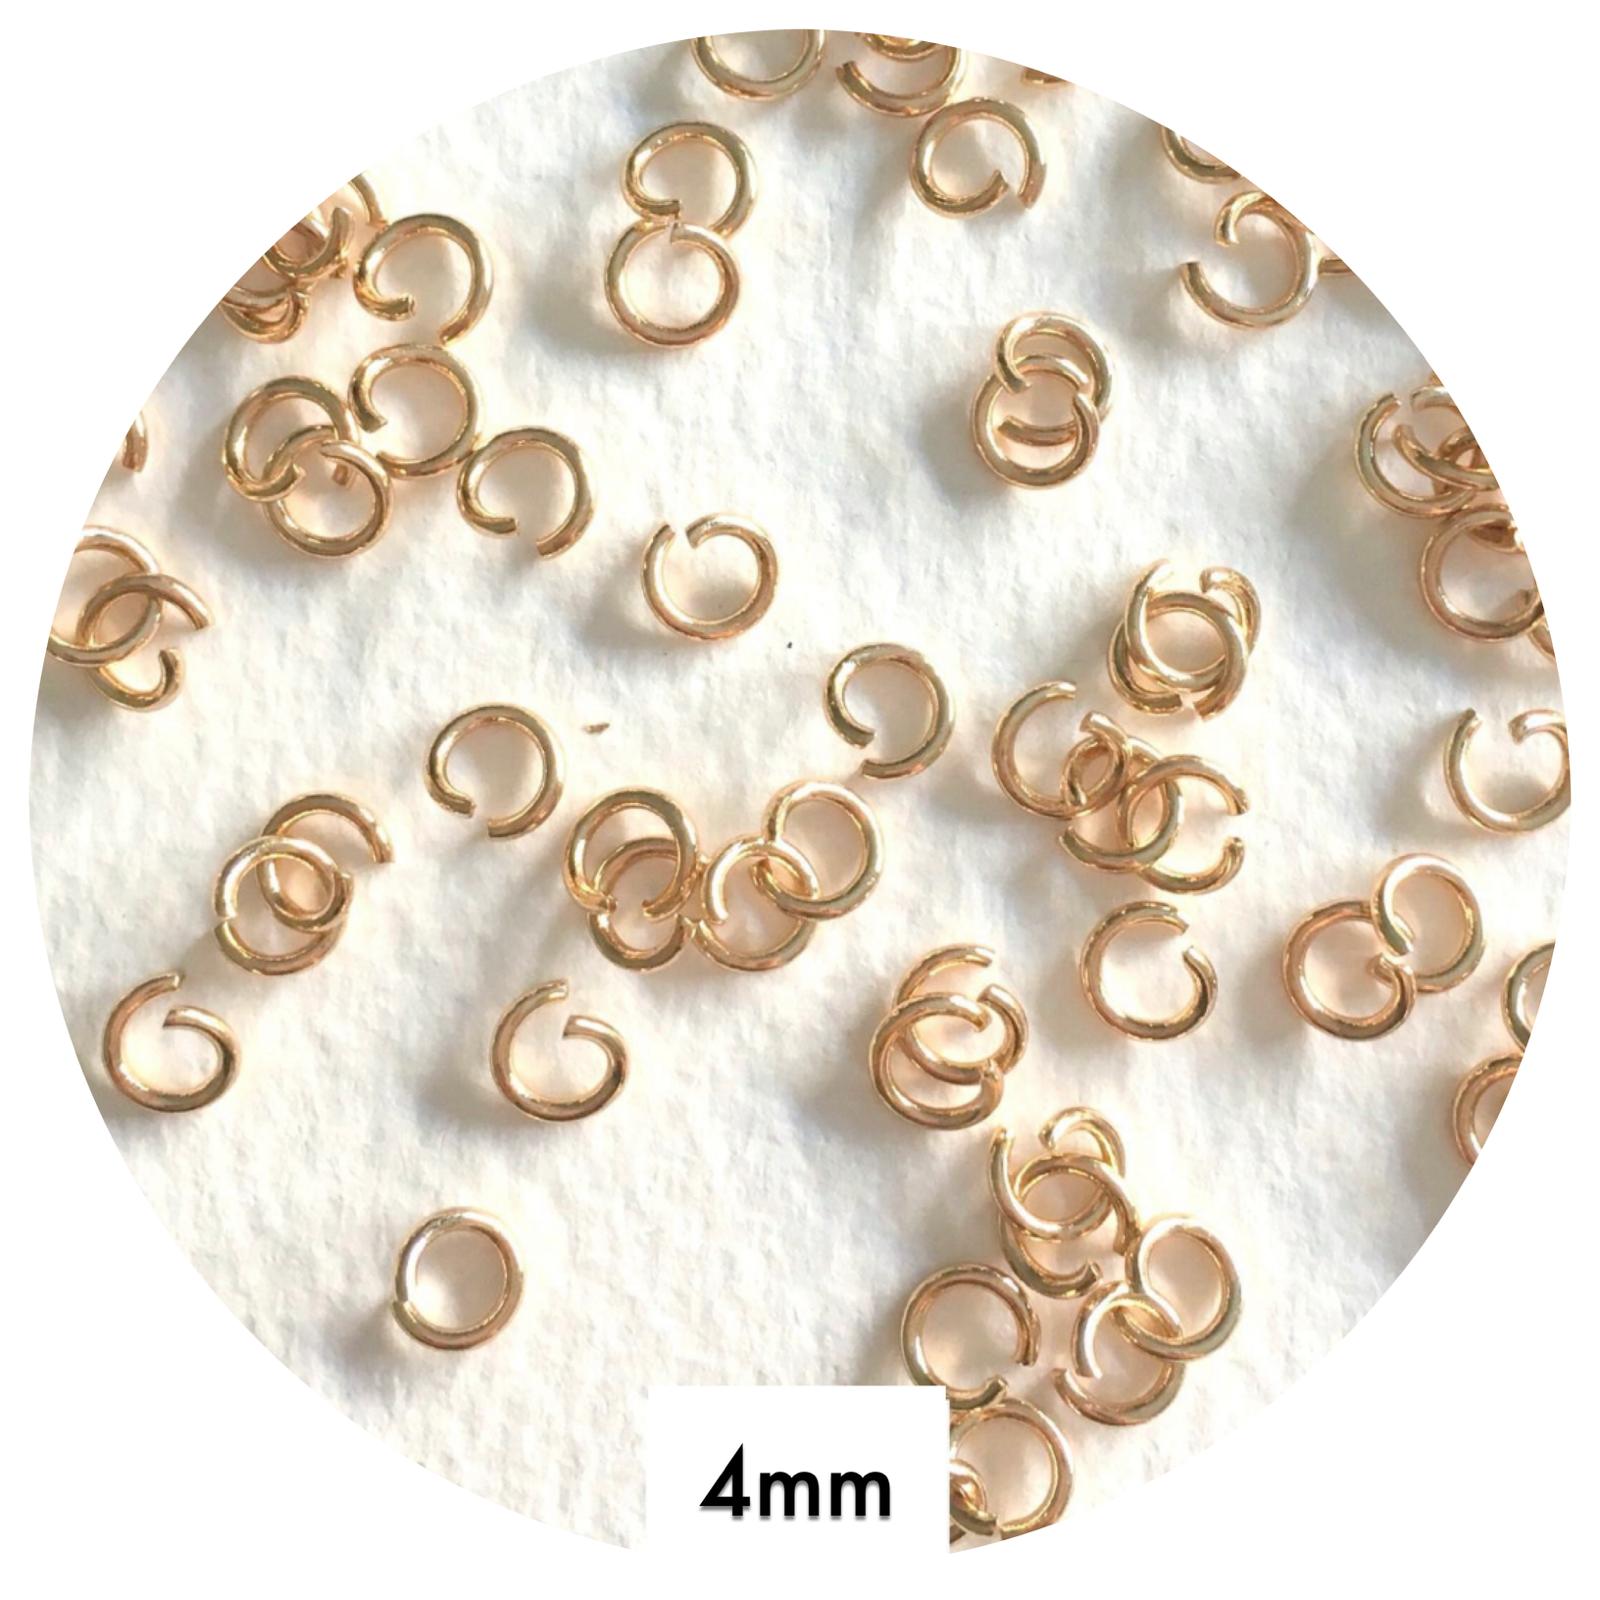 4mm Jump Rings - Gold Stainless Steel - 40 pcs